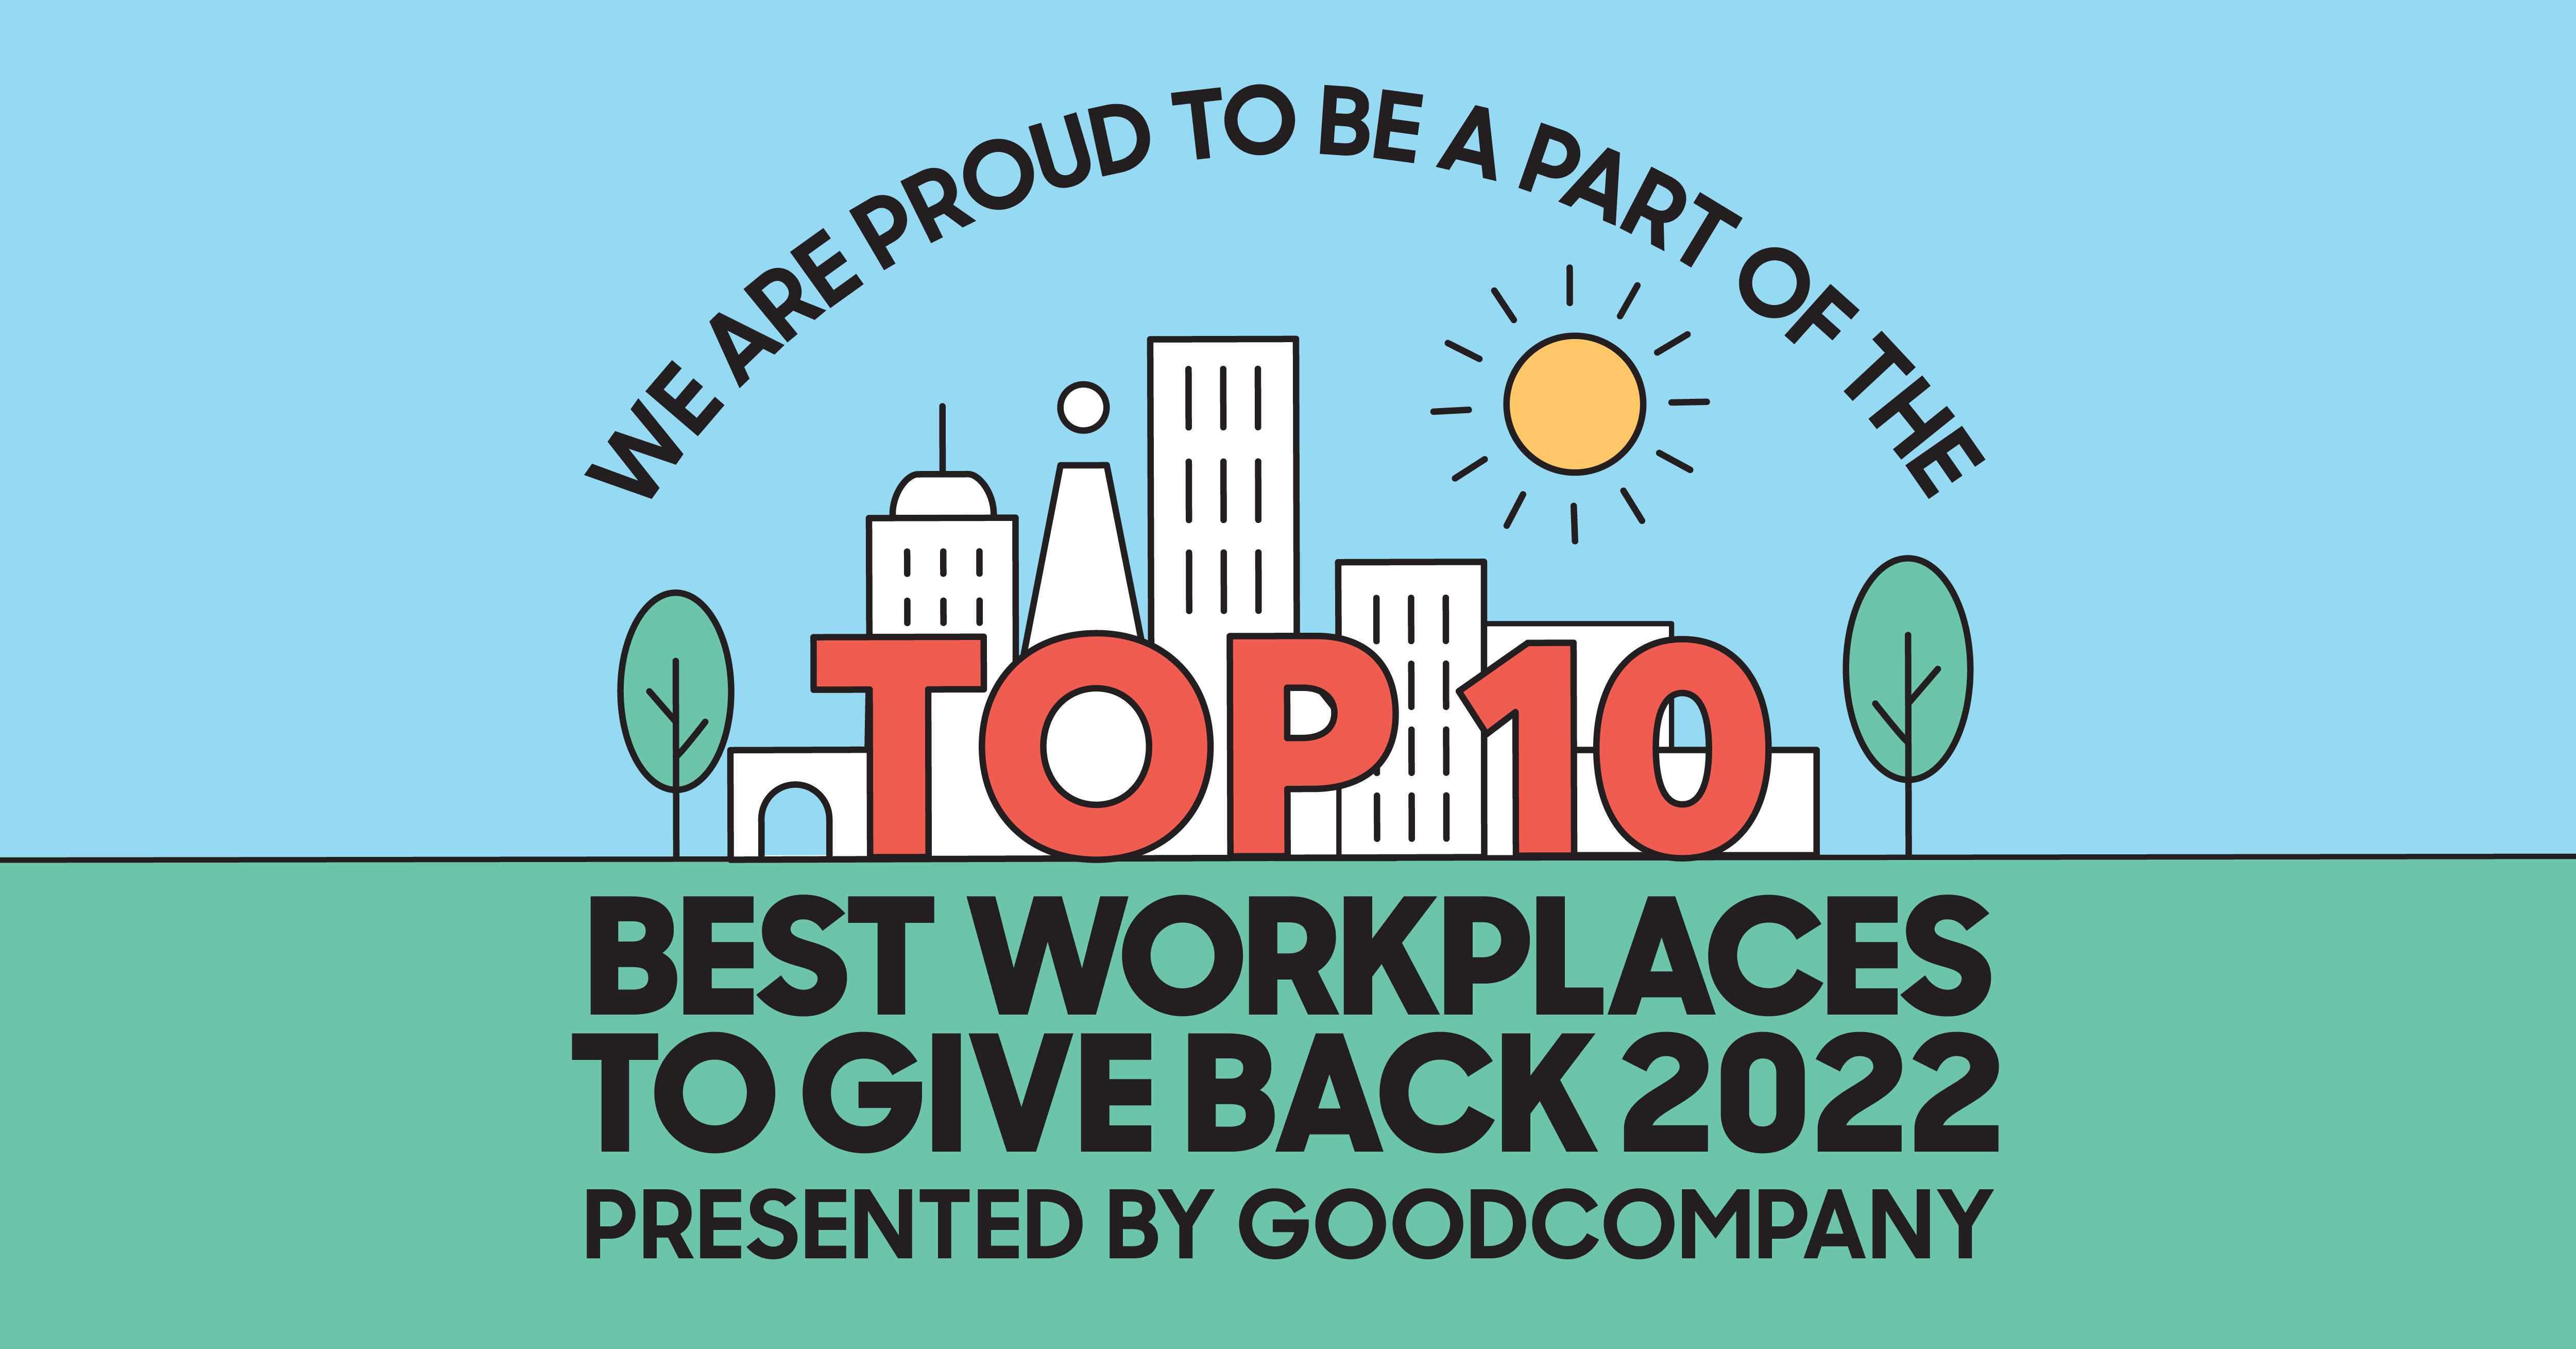 Mirvac recognised as one of the best workplaces to give back by GoodCompany